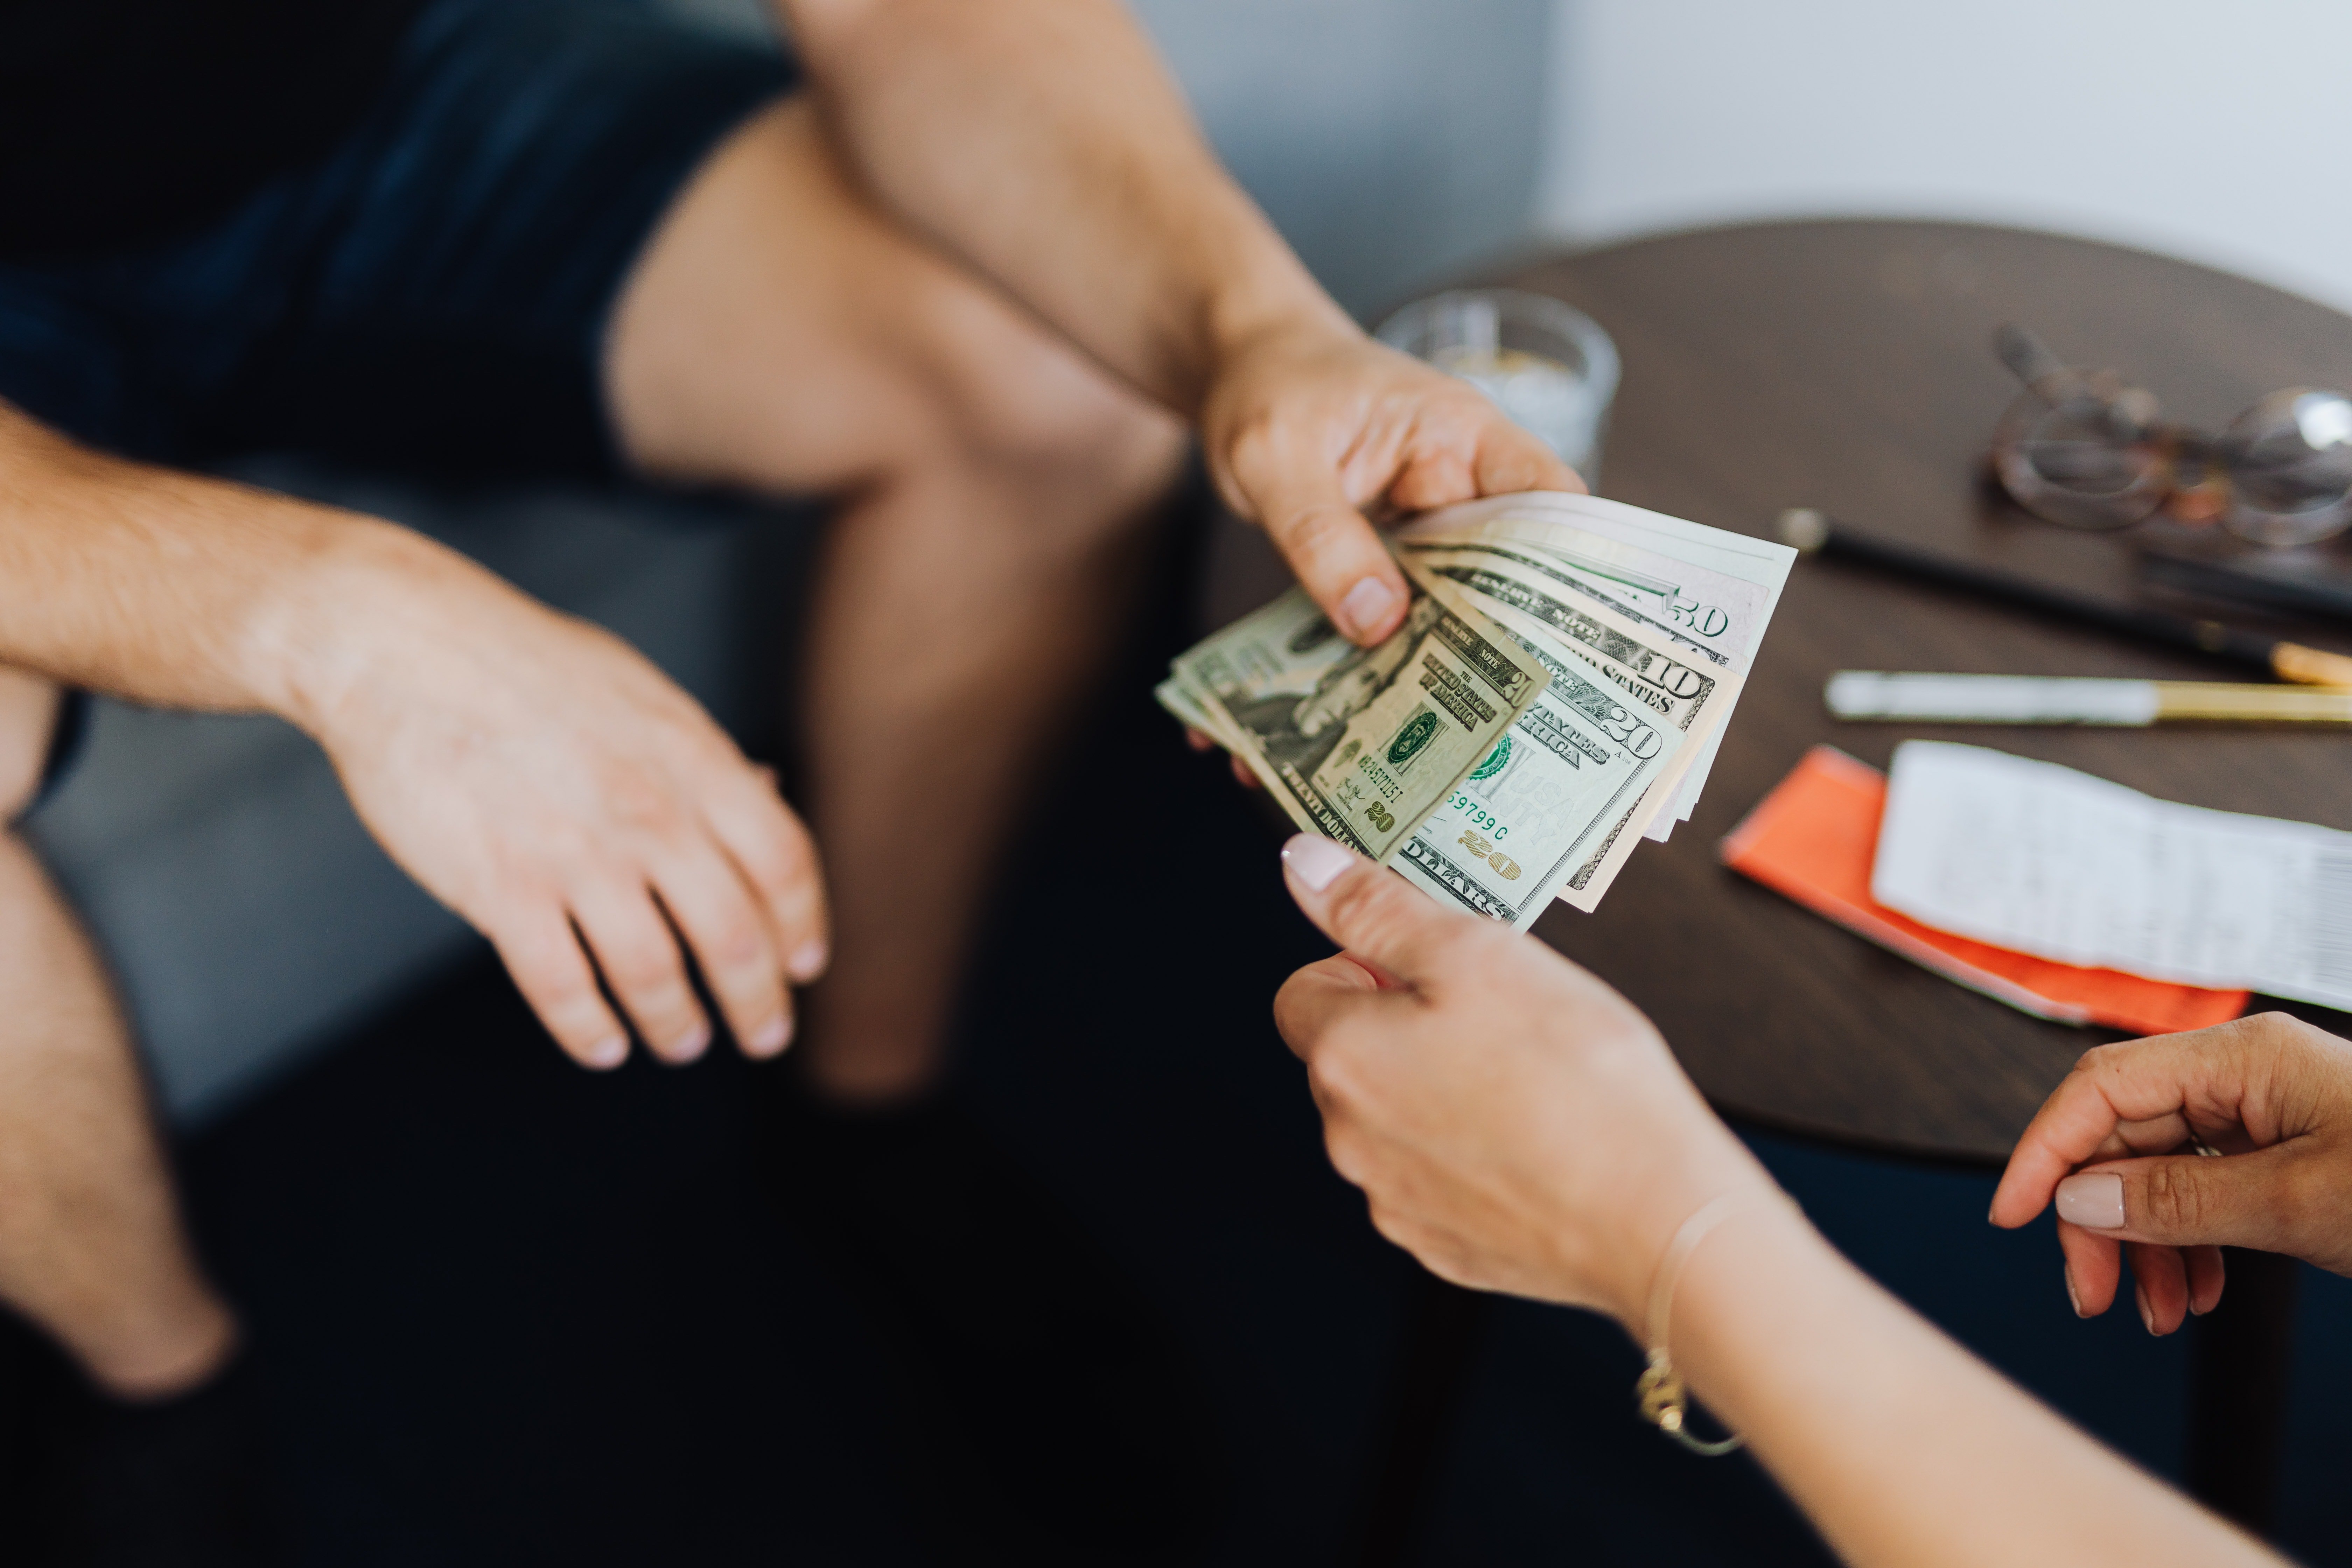 Man handing dollar notes to a woman | Source: Pexels